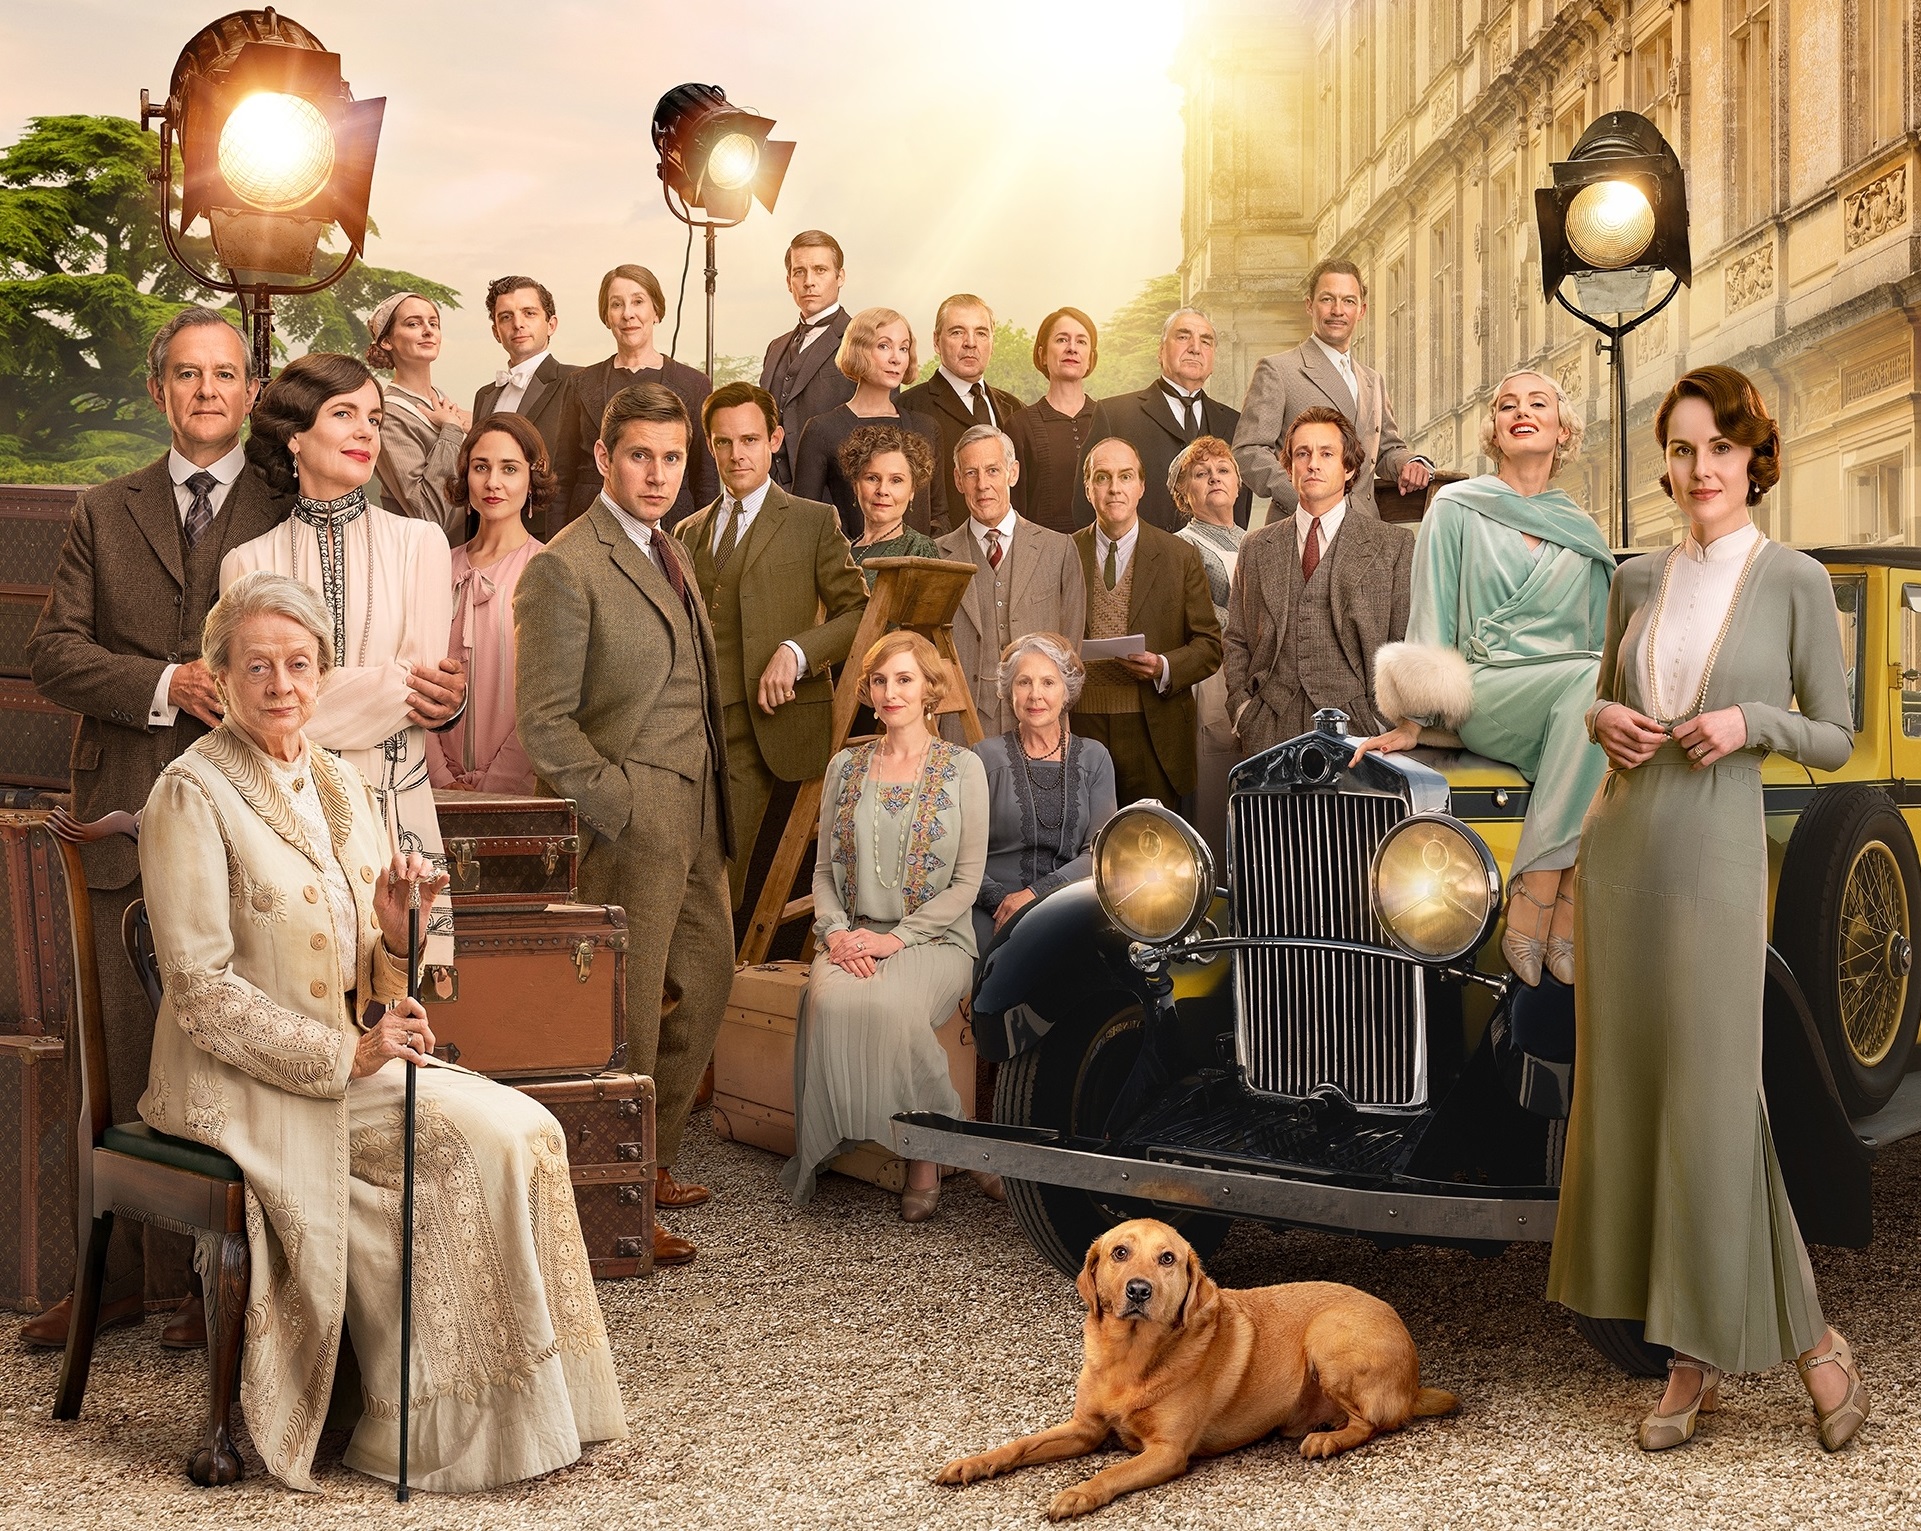 Buy tickets to Downton Abbey: a New Era premiere in London